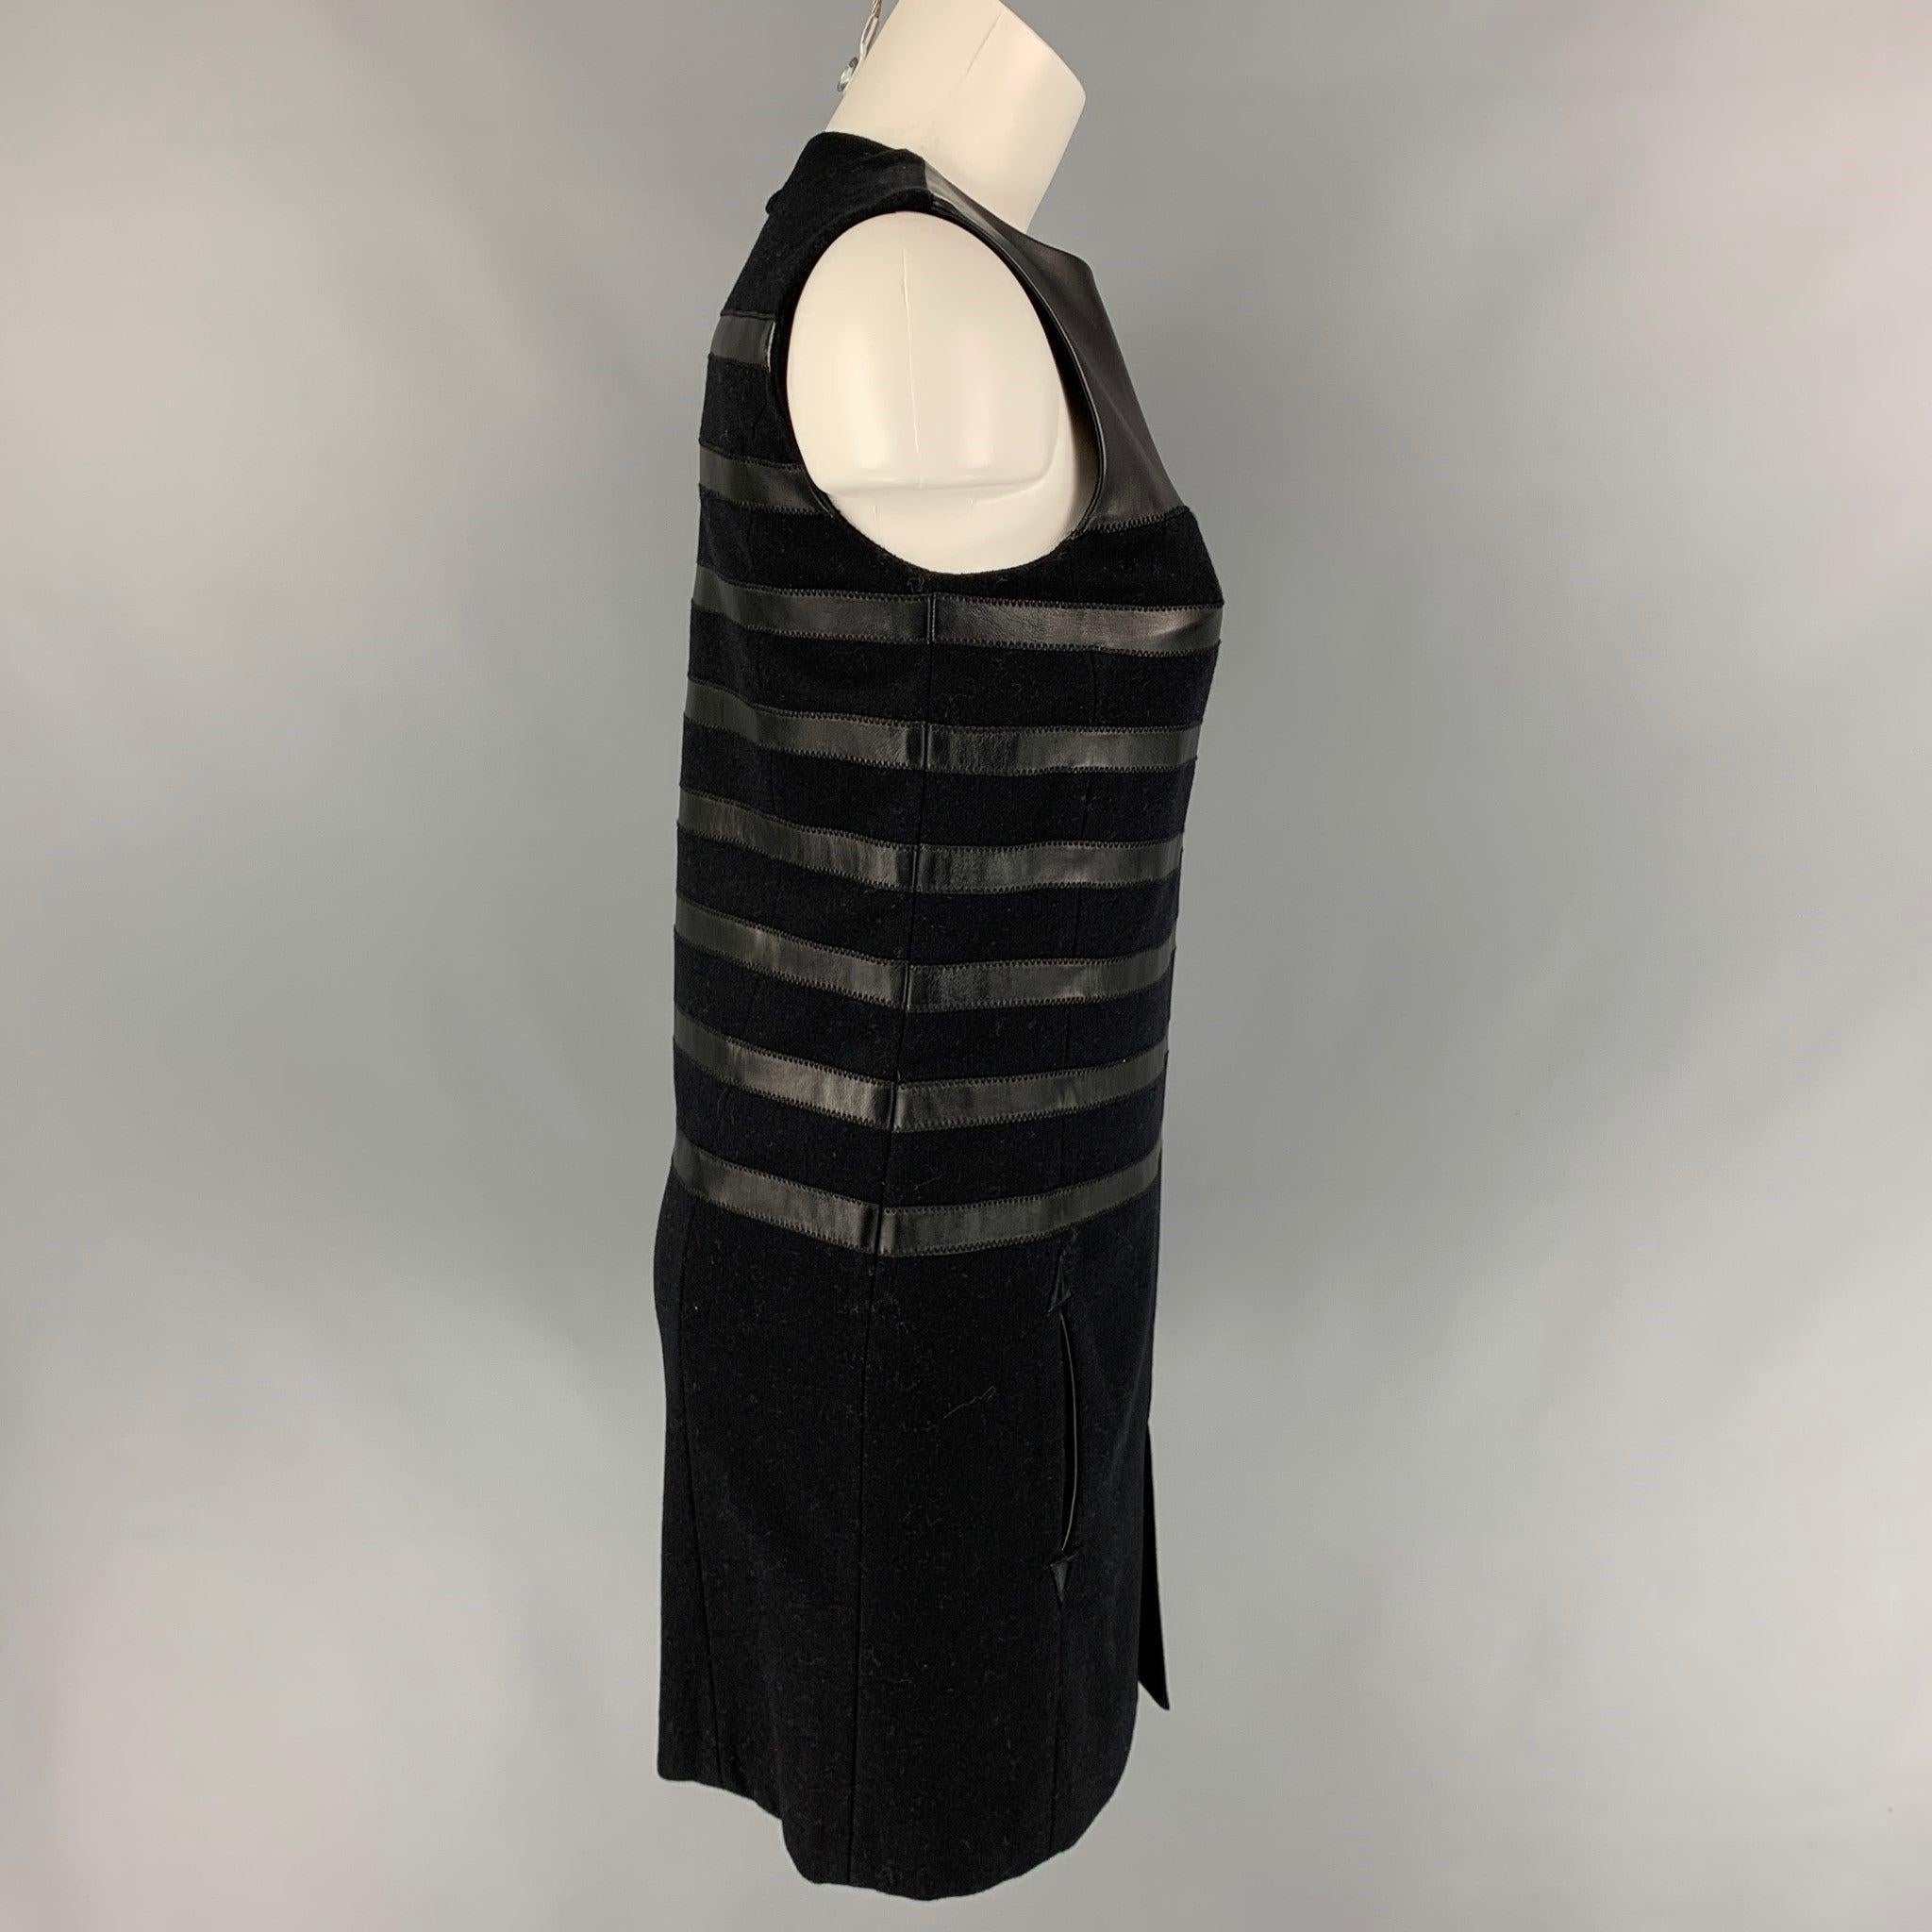 JEAN PAUL GAULTIER Size 6 Black Wool Blend Mixed Materials Shift Dress In Good Condition For Sale In San Francisco, CA